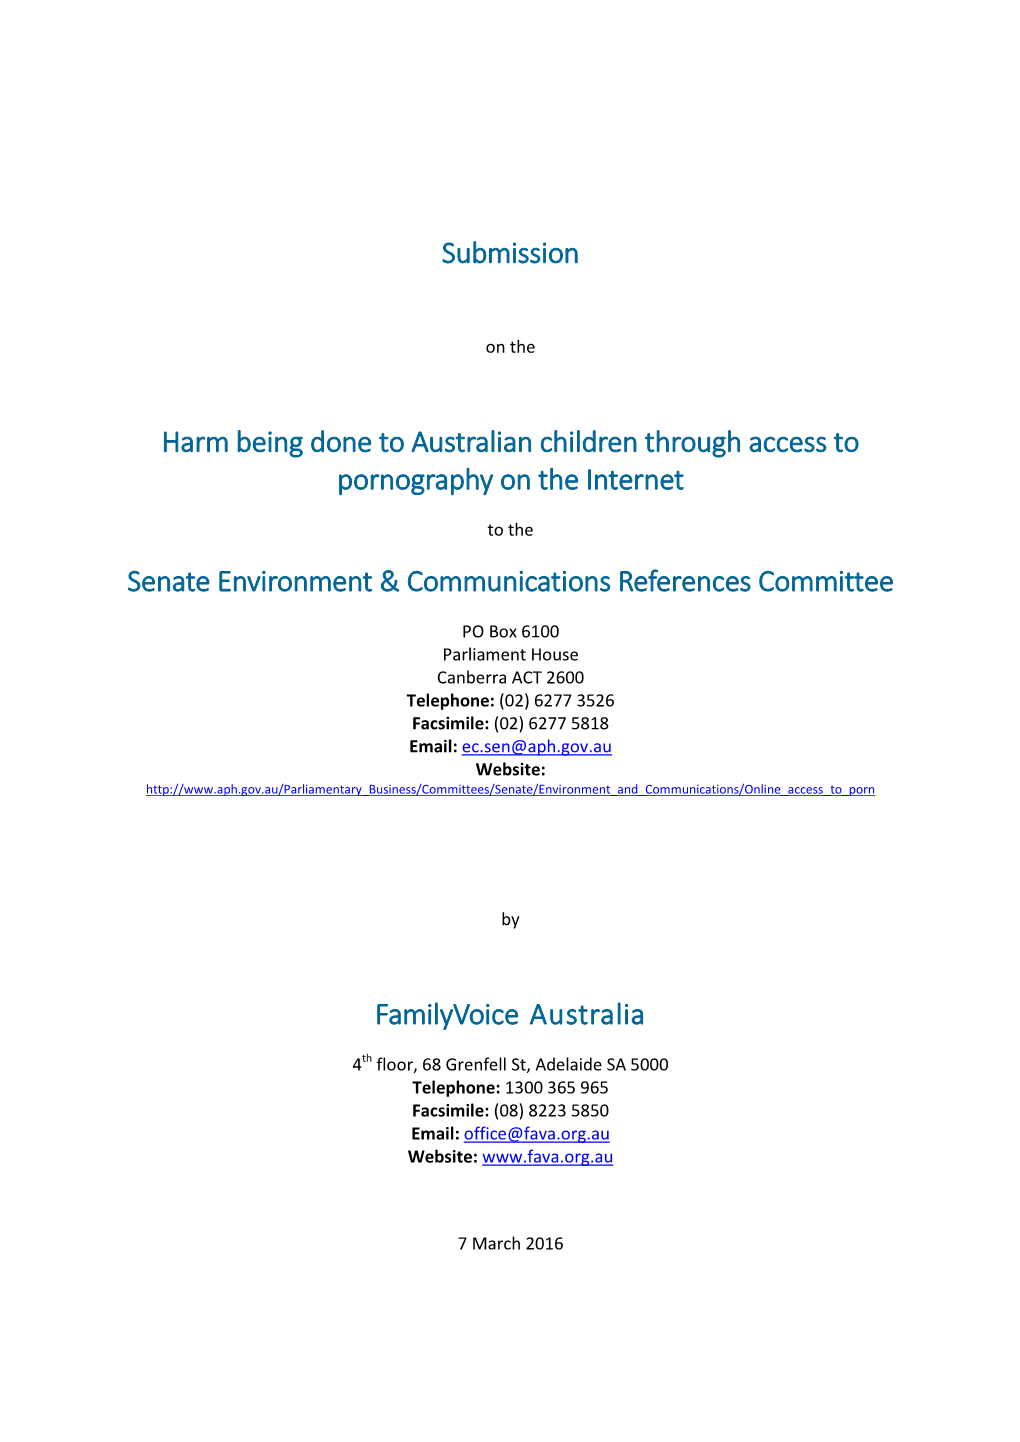 Submission Harm Being Done to Australian Children Through Access